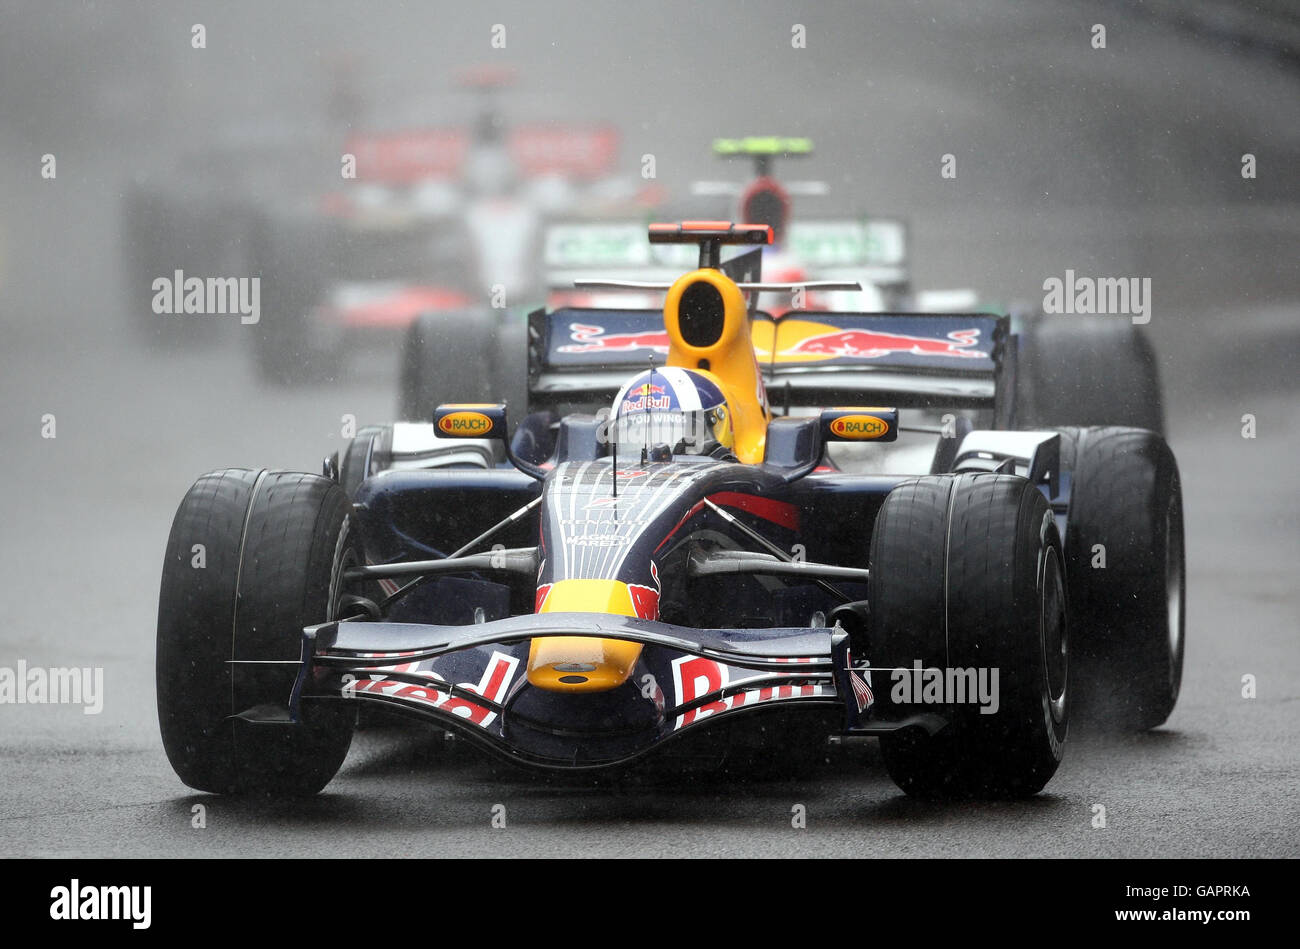 pouch ildsted Verdensrekord Guinness Book Red Bull Racing's David Coulthard during The Monte Carlo Grand Prix, Monaco  Stock Photo - Alamy